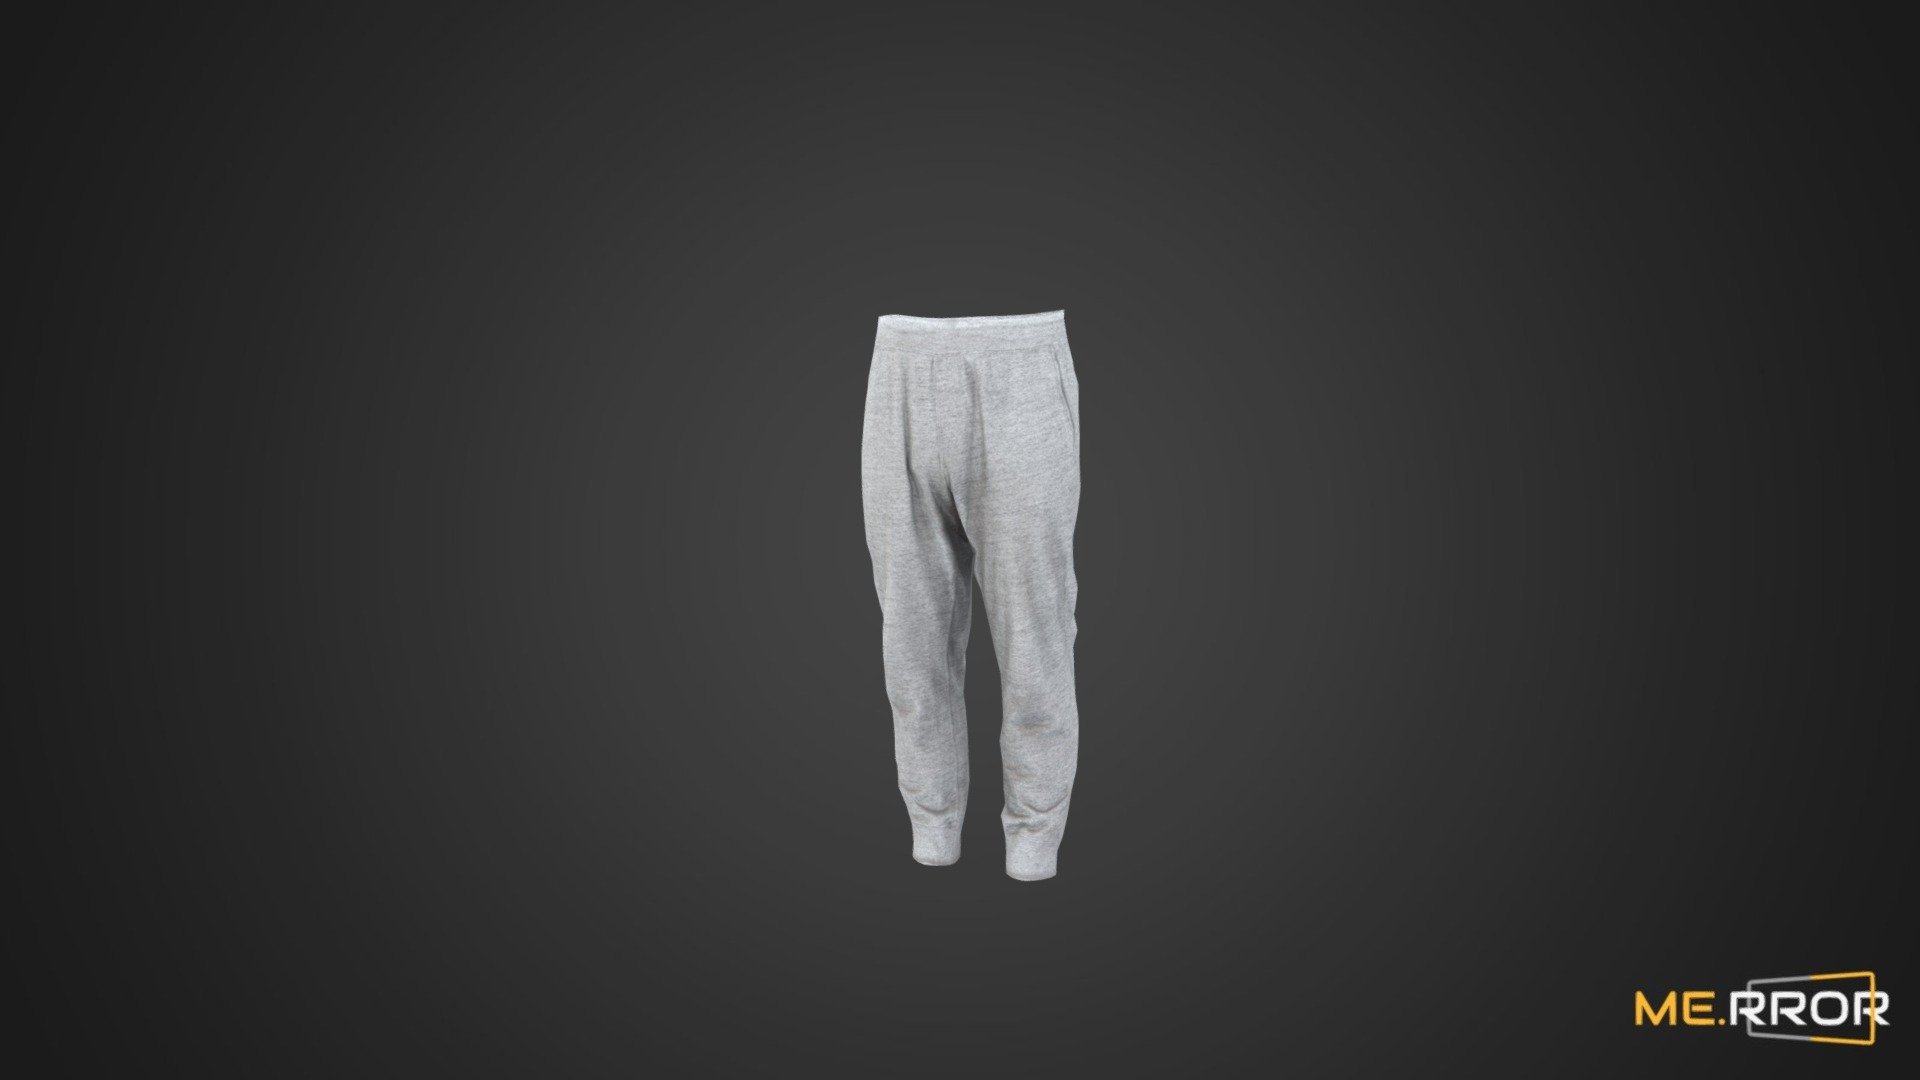 MERROR is a 3D Content PLATFORM which introduces various Asian assets to the 3D world


3DScanning #Photogrametry #ME.RROR - [Game-Ready] Gray Sweat pants - Buy Royalty Free 3D model by ME.RROR Studio (@merror) 3d model